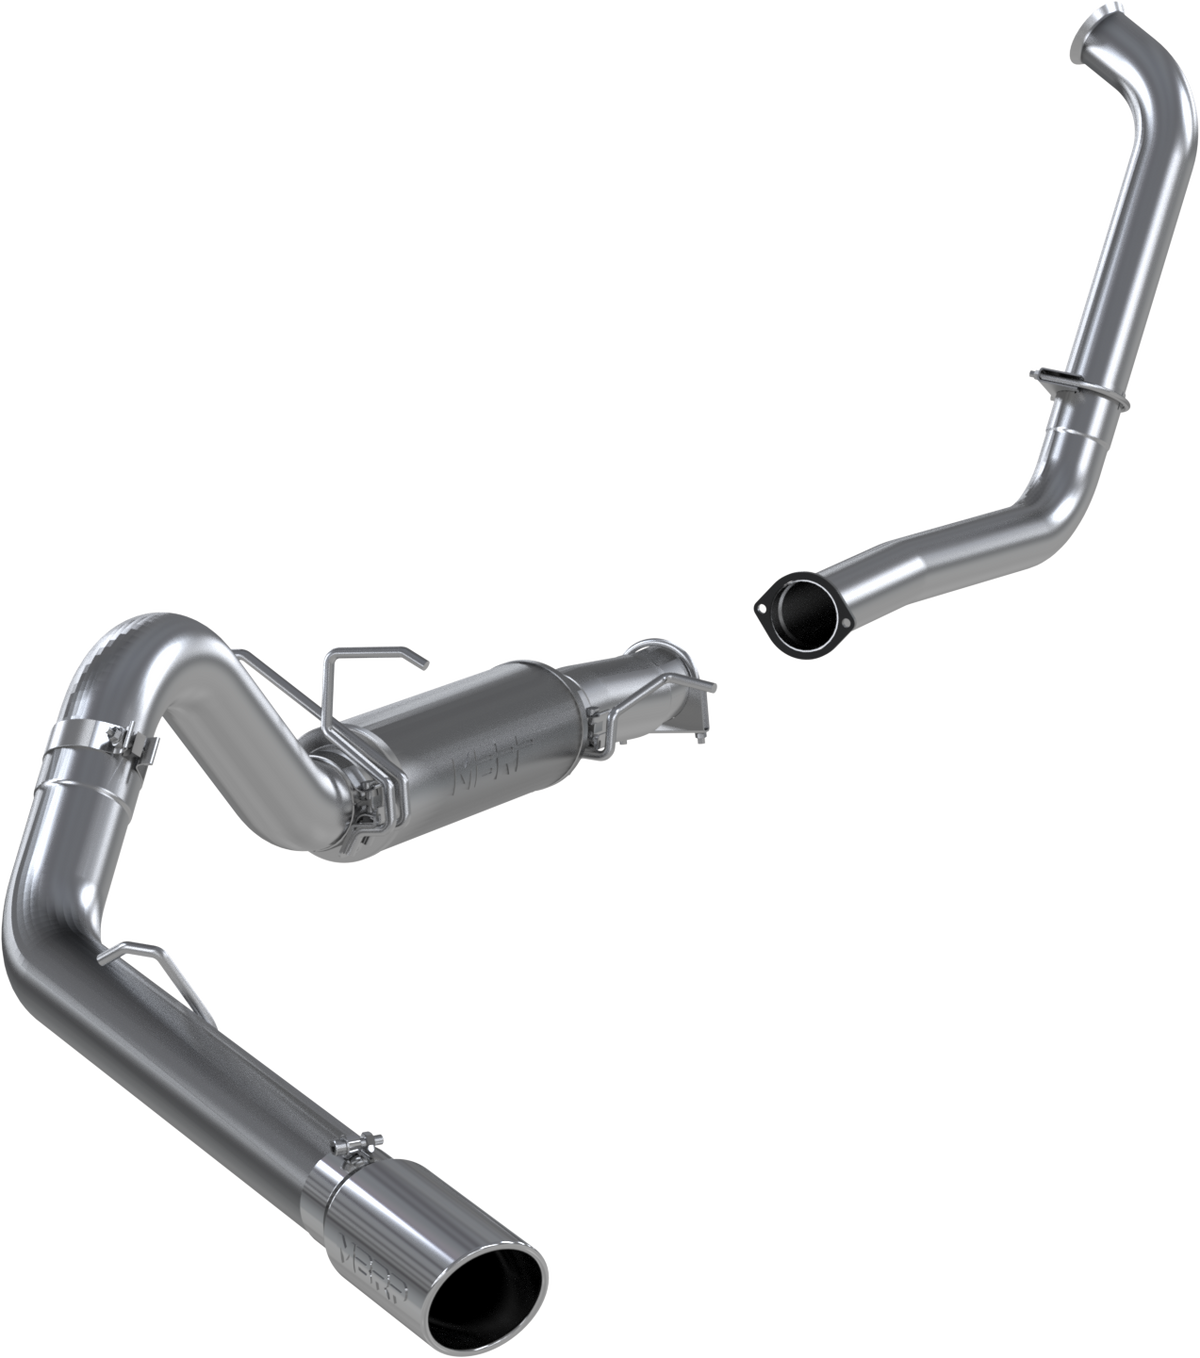 2005 ford excursion exhaust